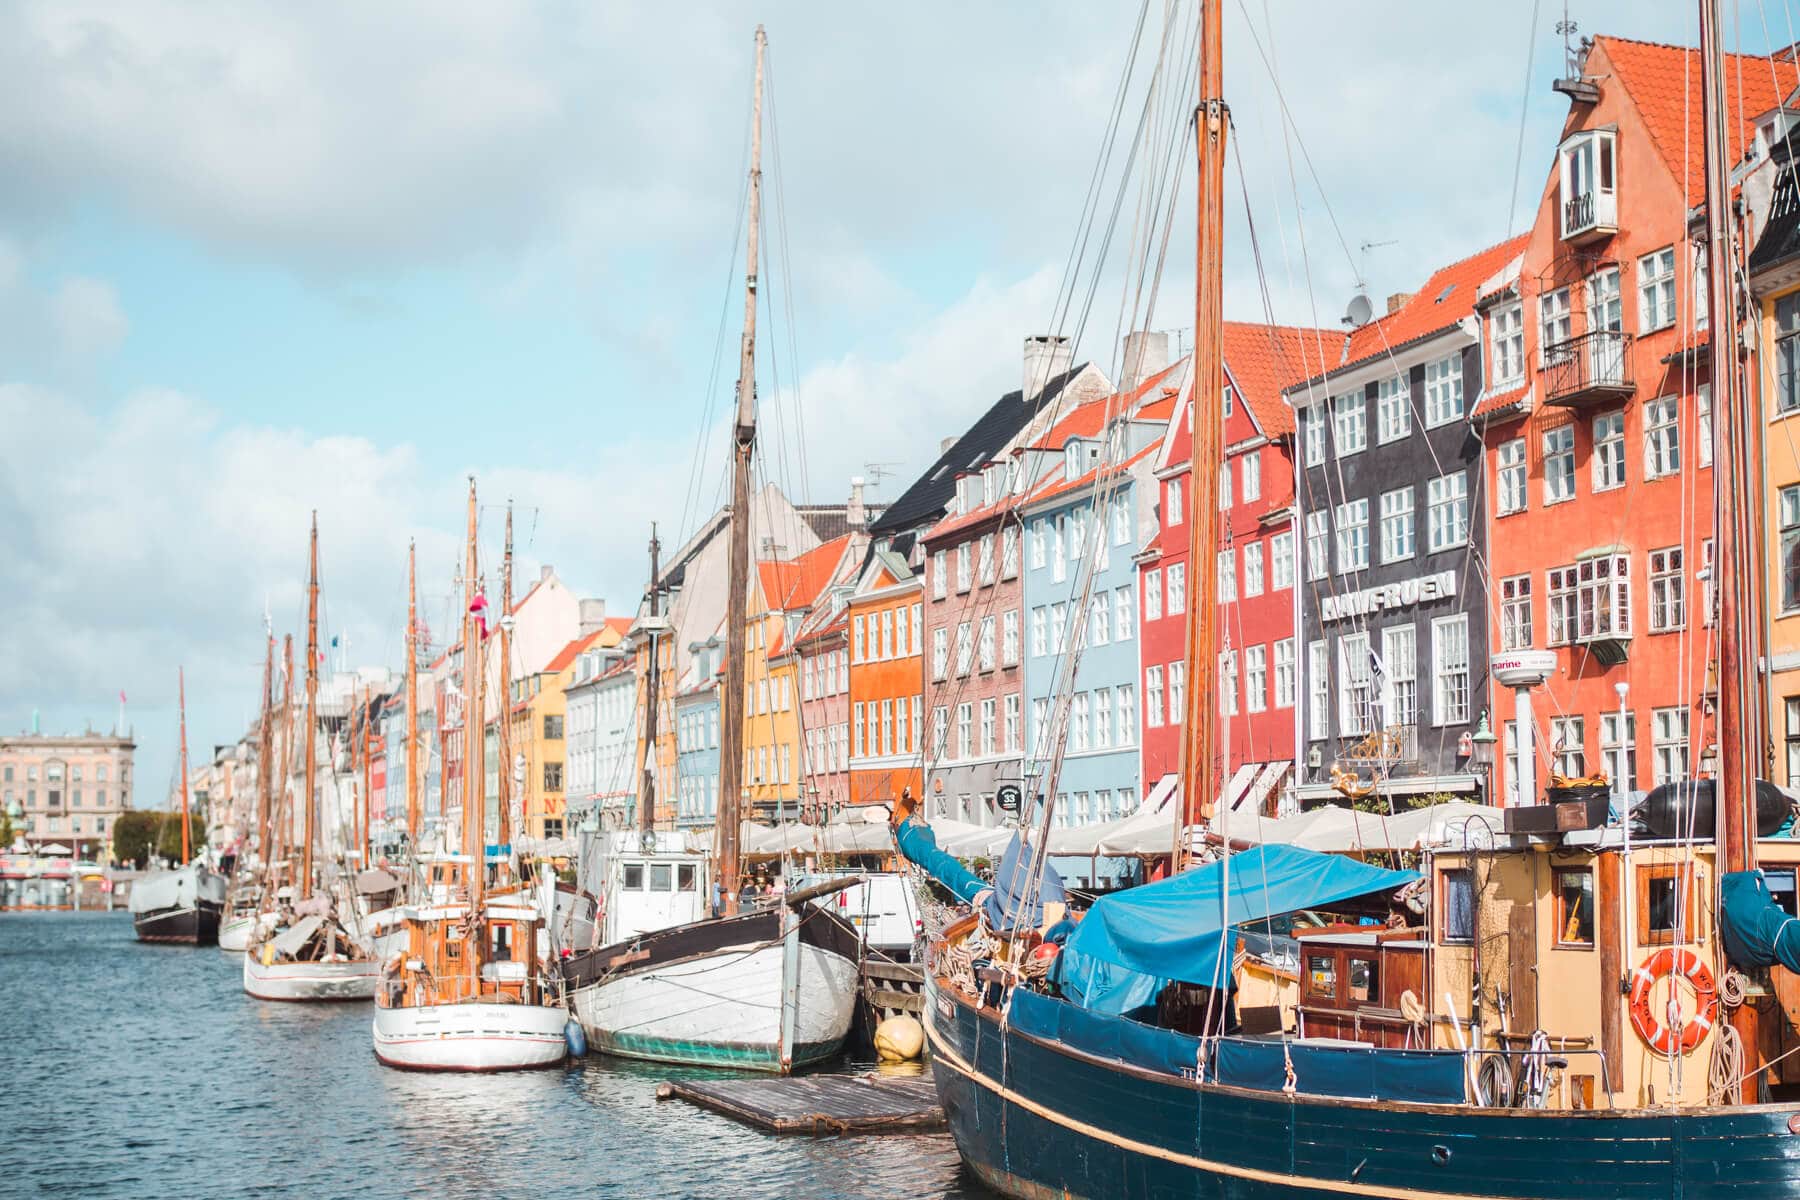 The Ultimate Denmark Bucket List. 101 awesome things to do - Colorful Nyhavn in Copenhagen